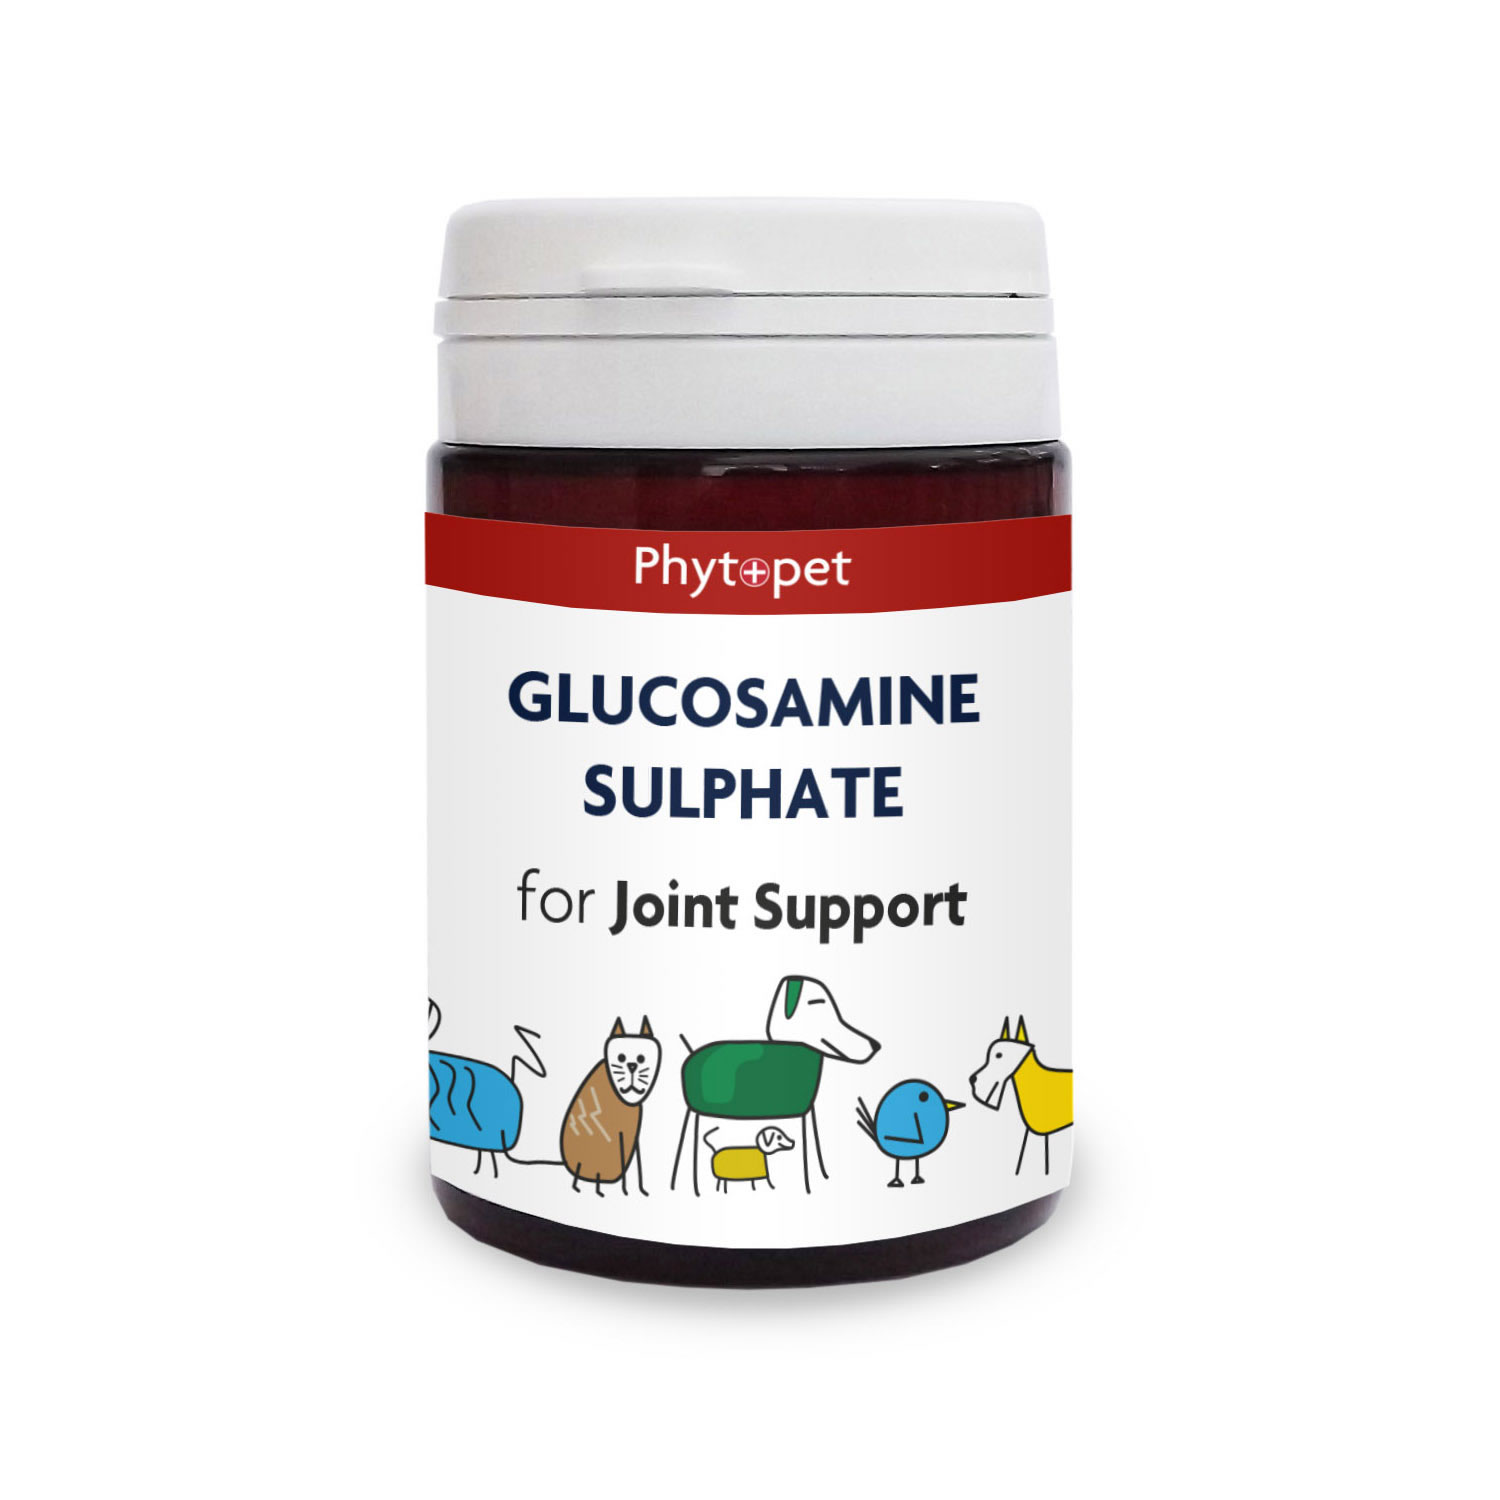 PHYTOPET GLUCOSAMINE SULPHATE 500MG